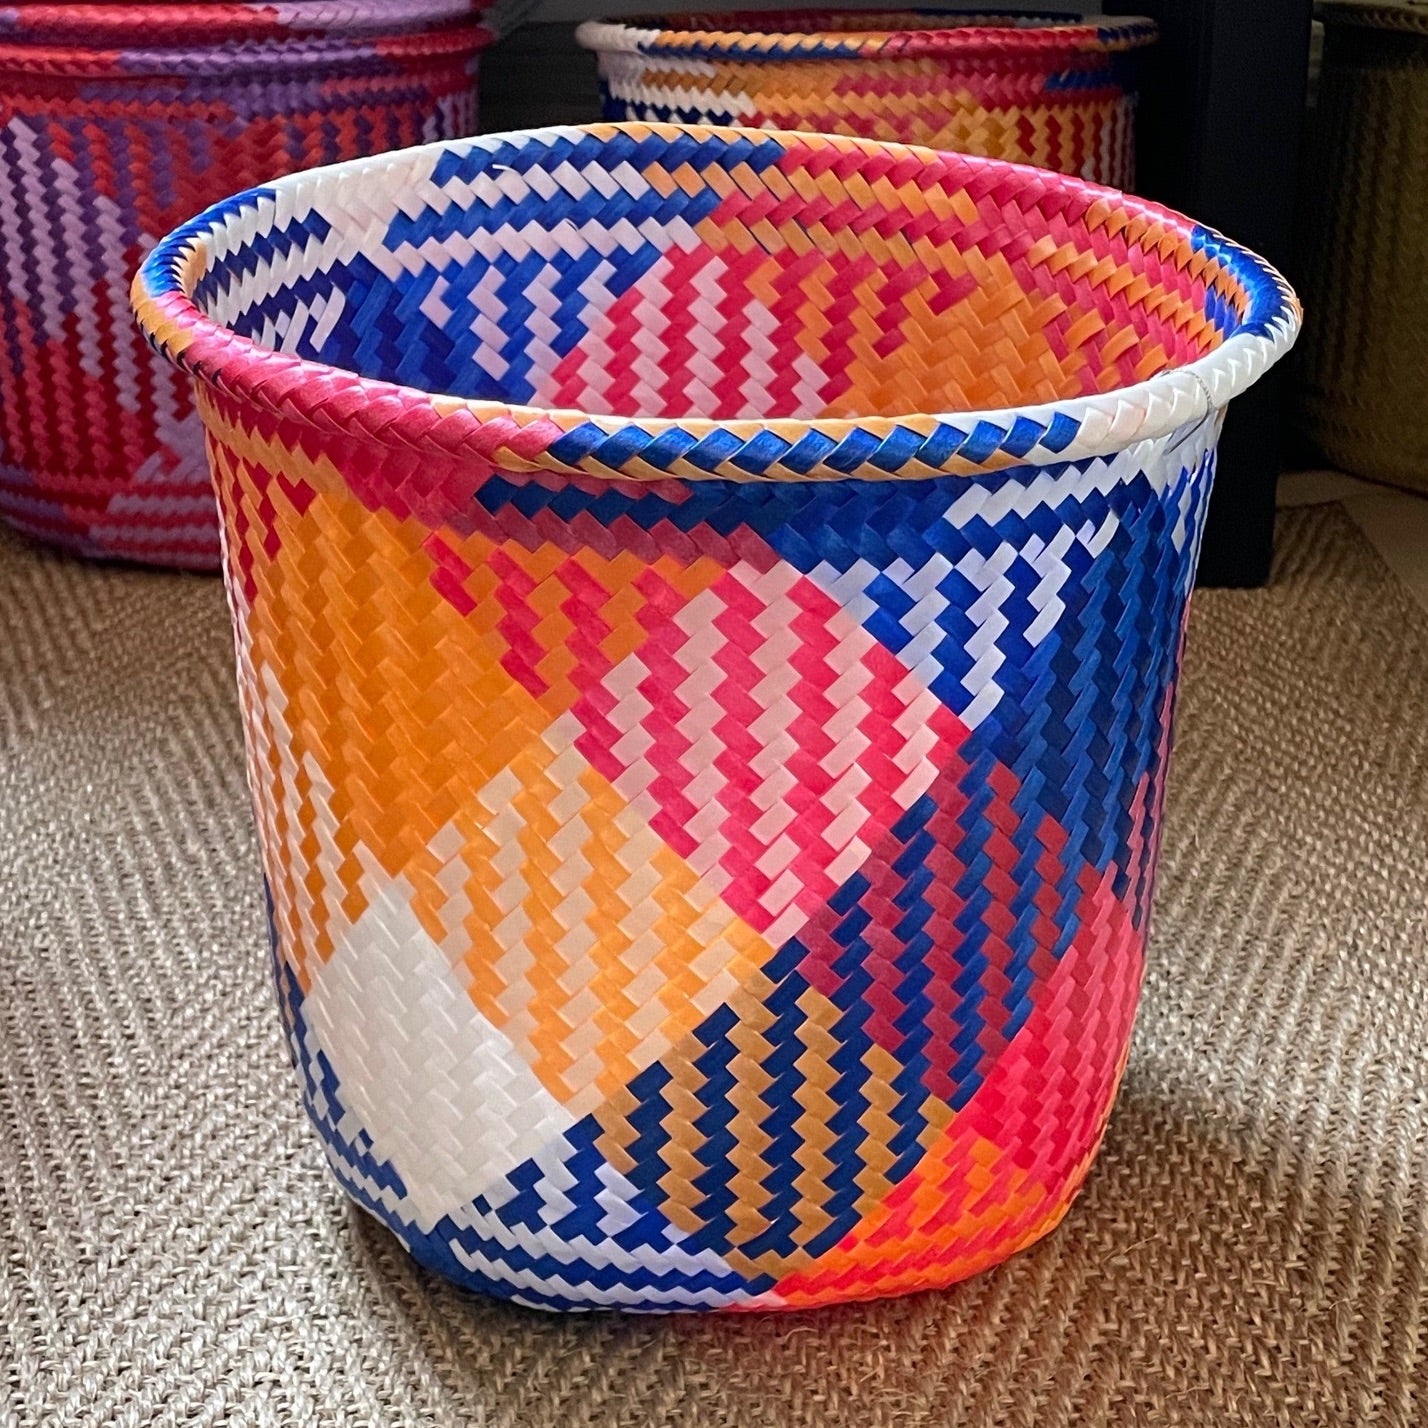 Handwoven Mexican baskets